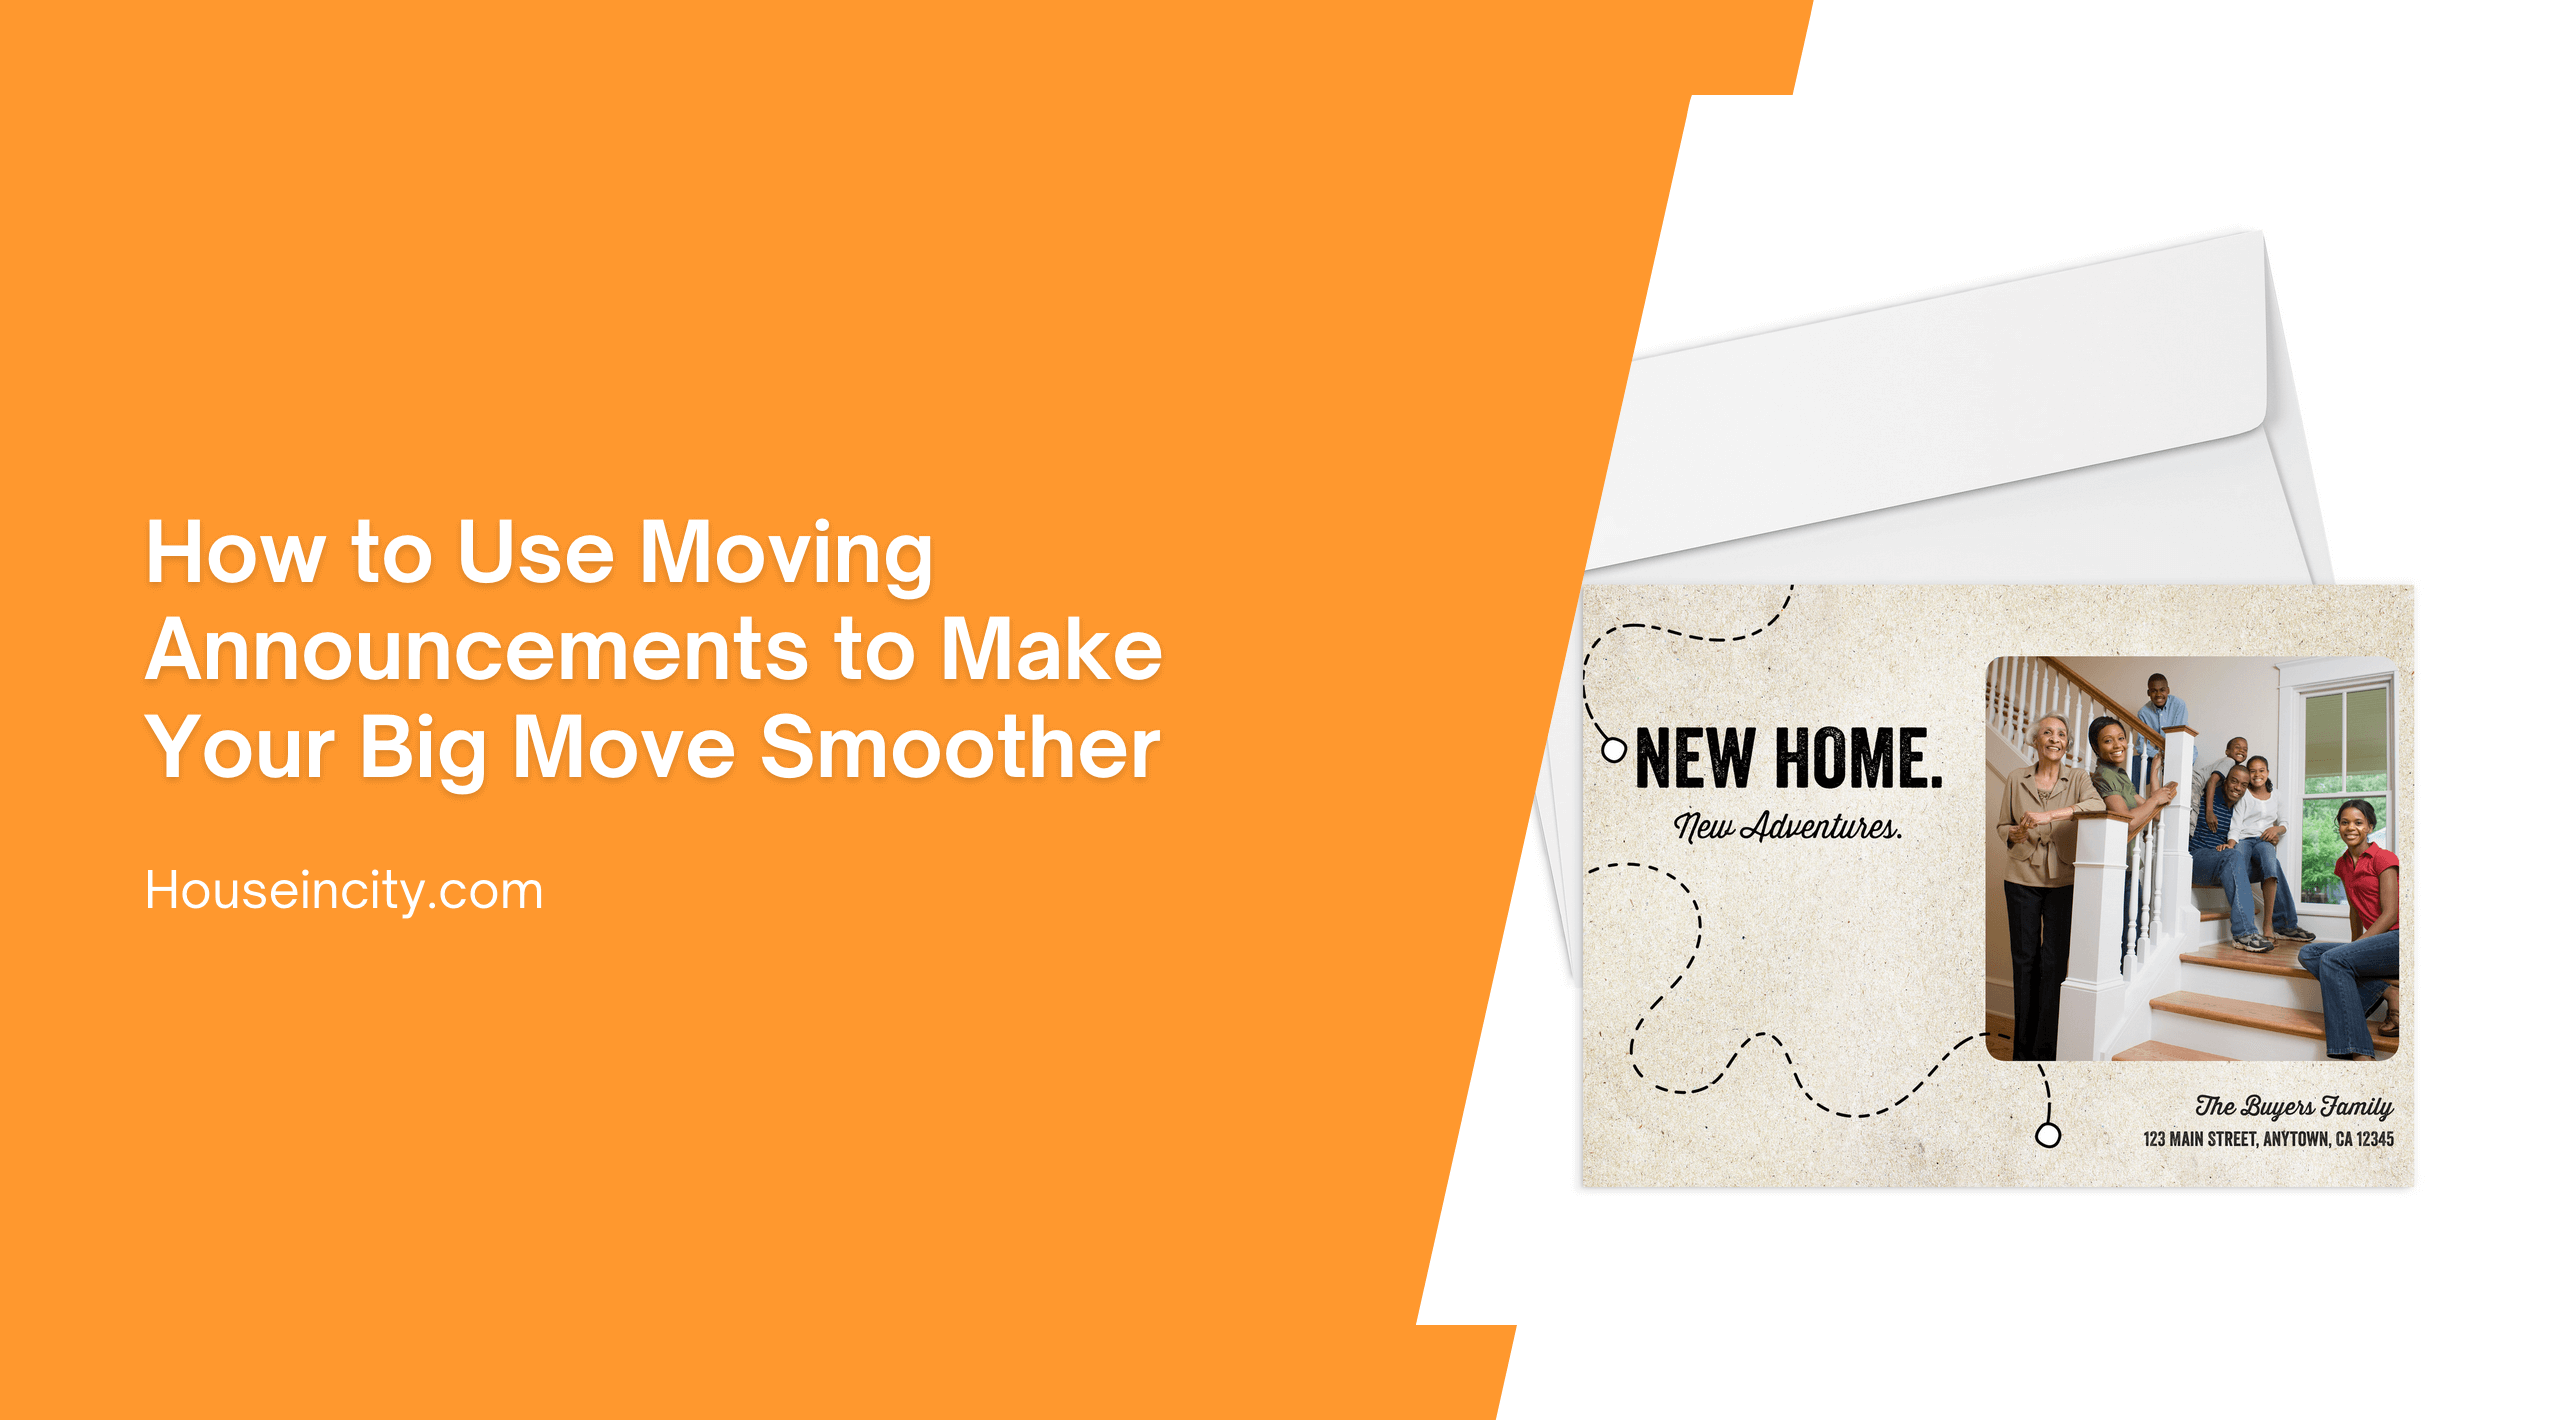 How to Use Moving Announcements to Make Your Big Move Smoother